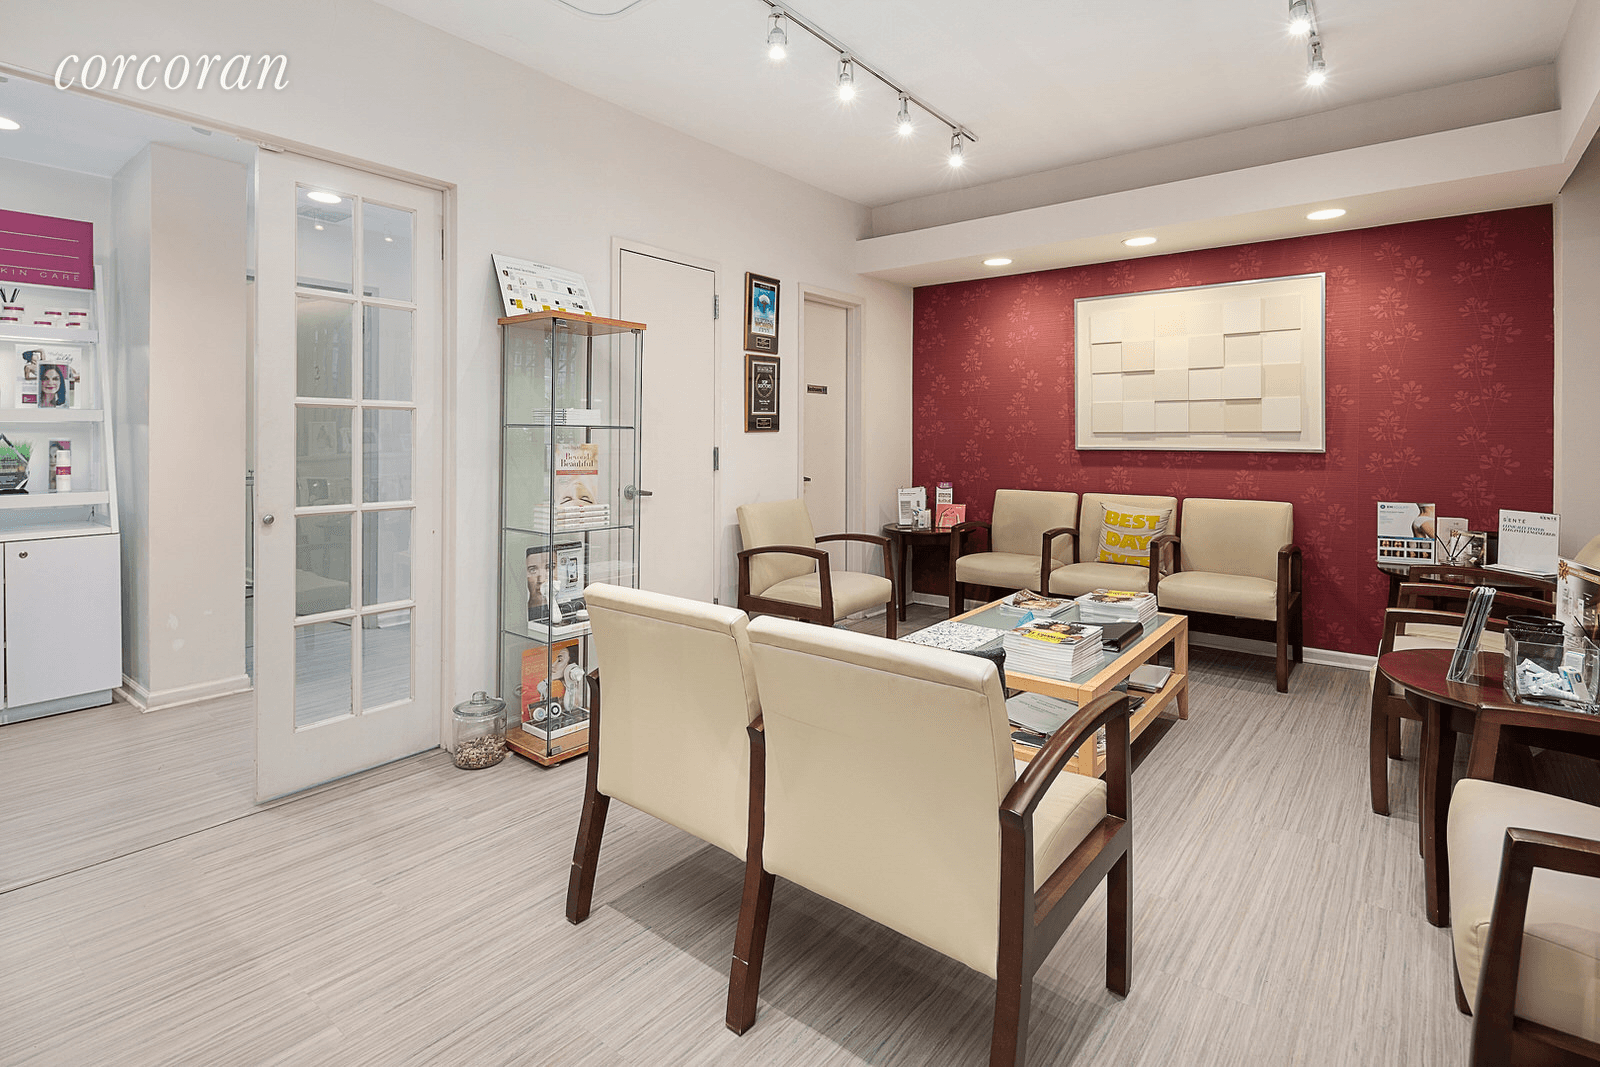 Turn key dermatologist's office in pristine condition, featuring a spacious waiting room and elegantly configured reception area.